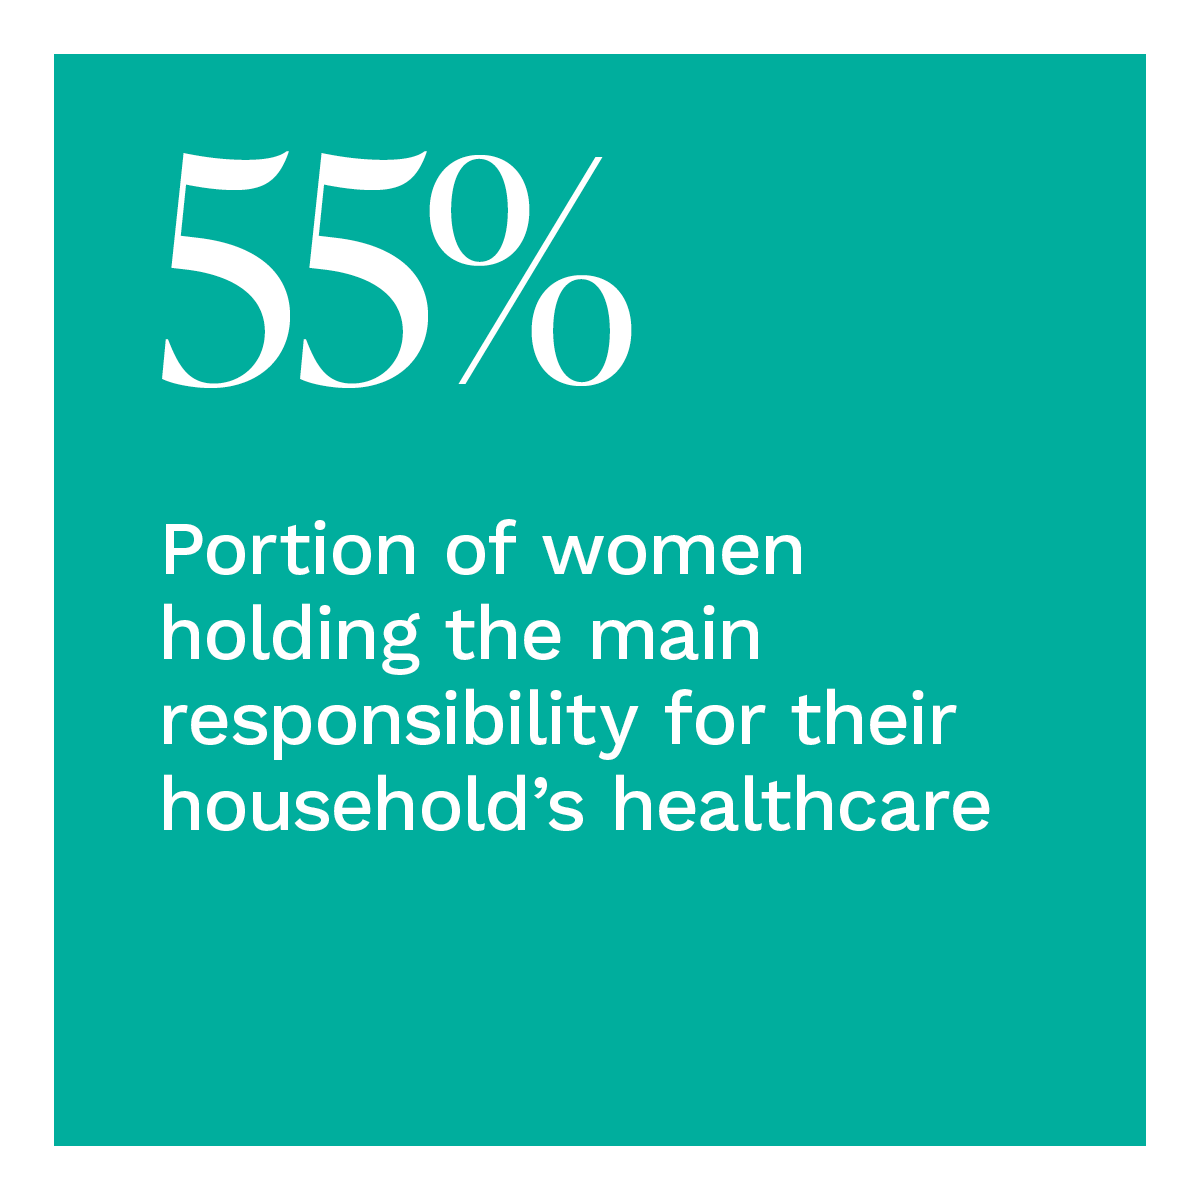 55%: Portion of women holding the main responsibility for their household’s healthcare